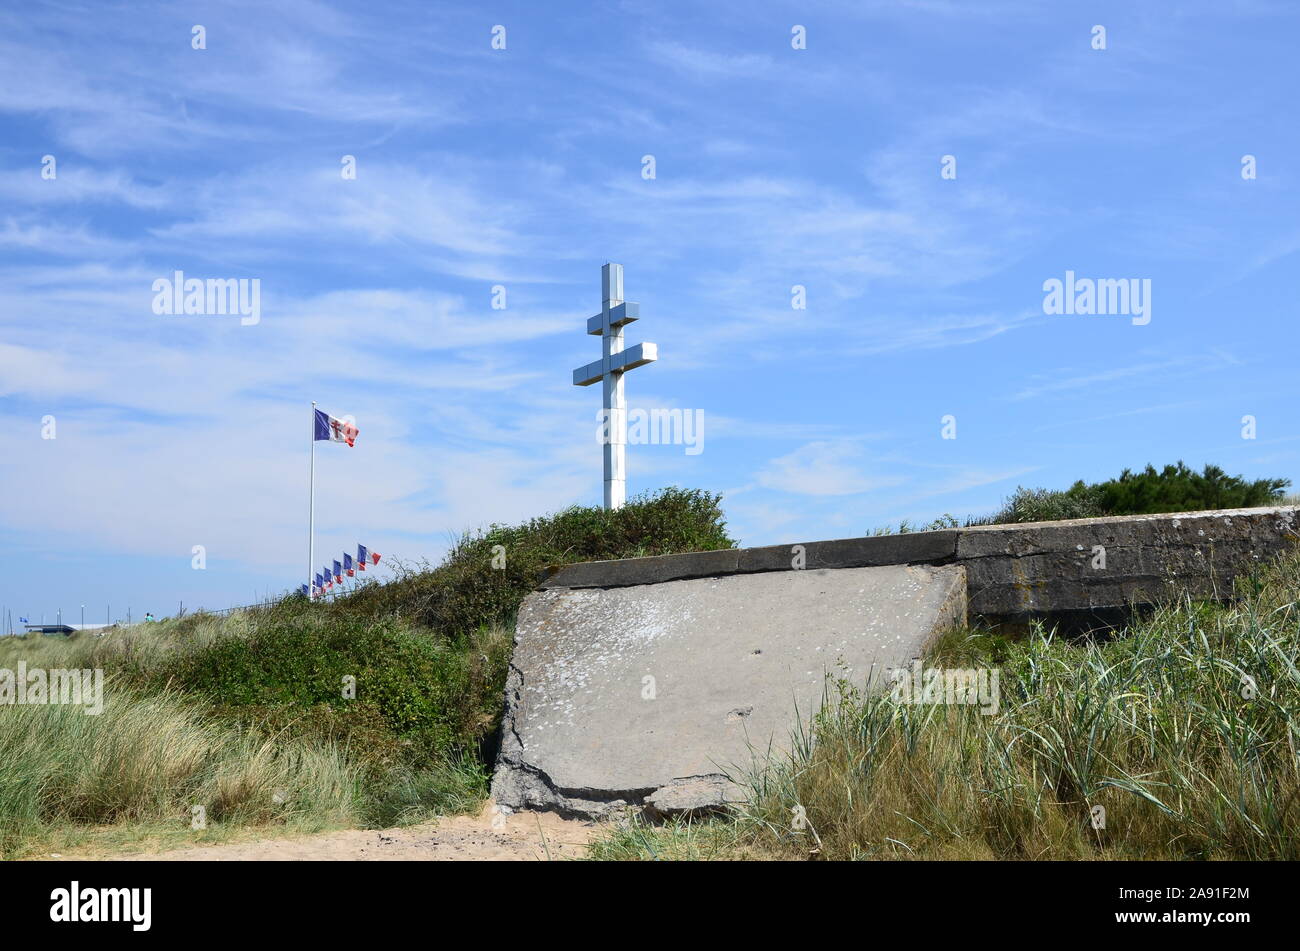 Cross of Lorraine, Courselles sur Mer, Normandy, France Stock Photo